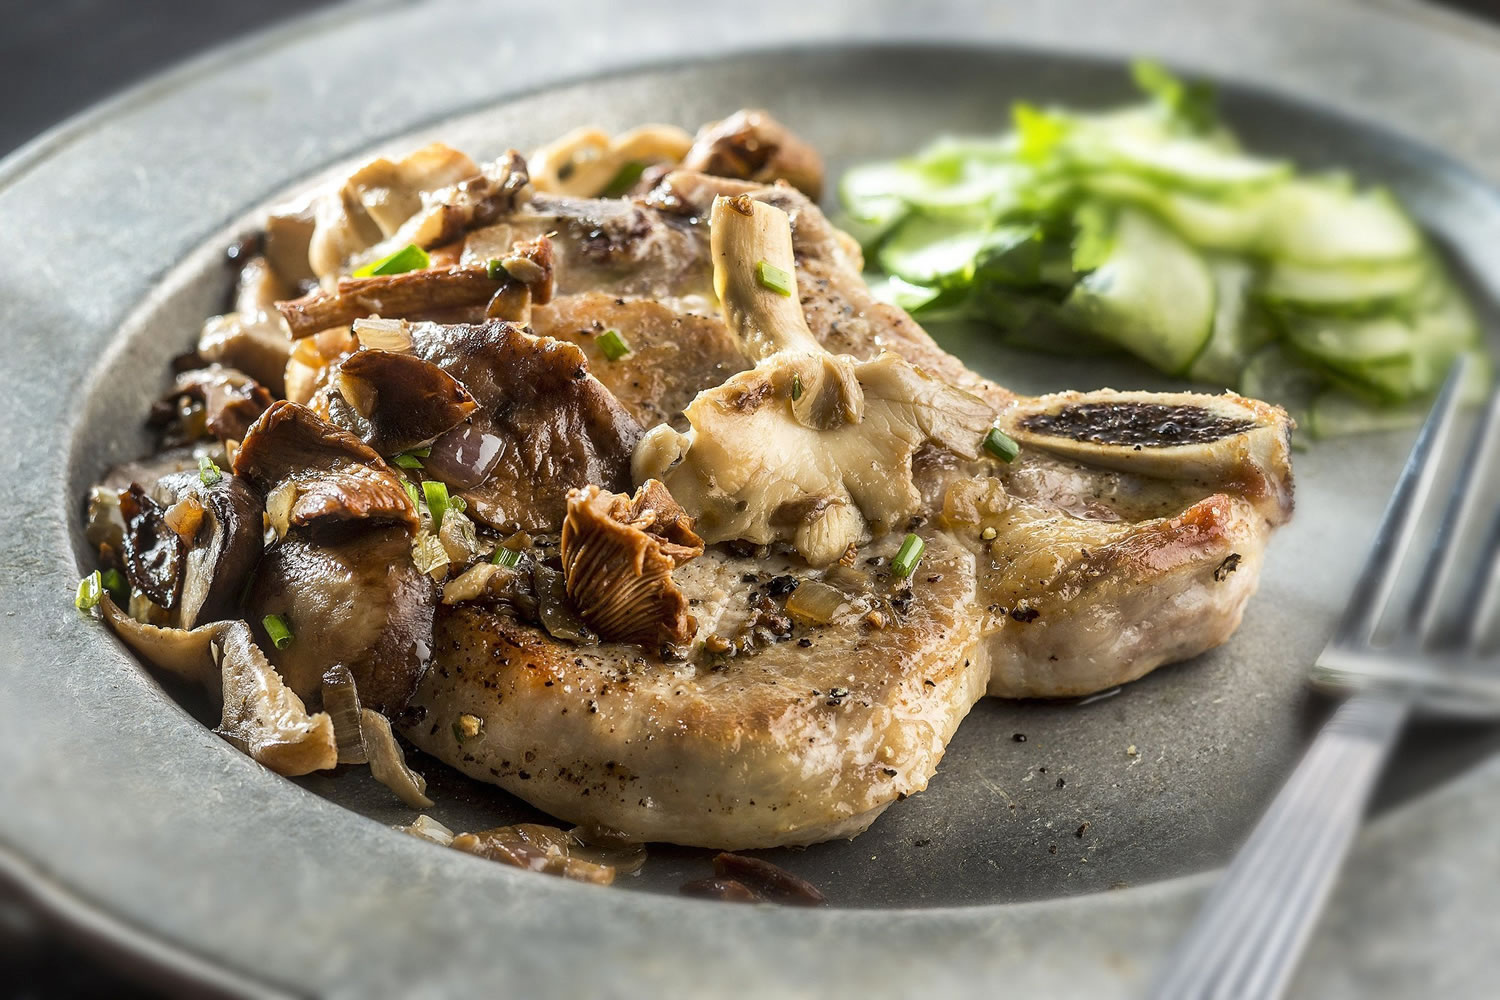 Golden pork chops smothered in sauteed chanterelles and accompanied by a simple and quick cucumber salad are a delicious way to use mushrooms this fall.